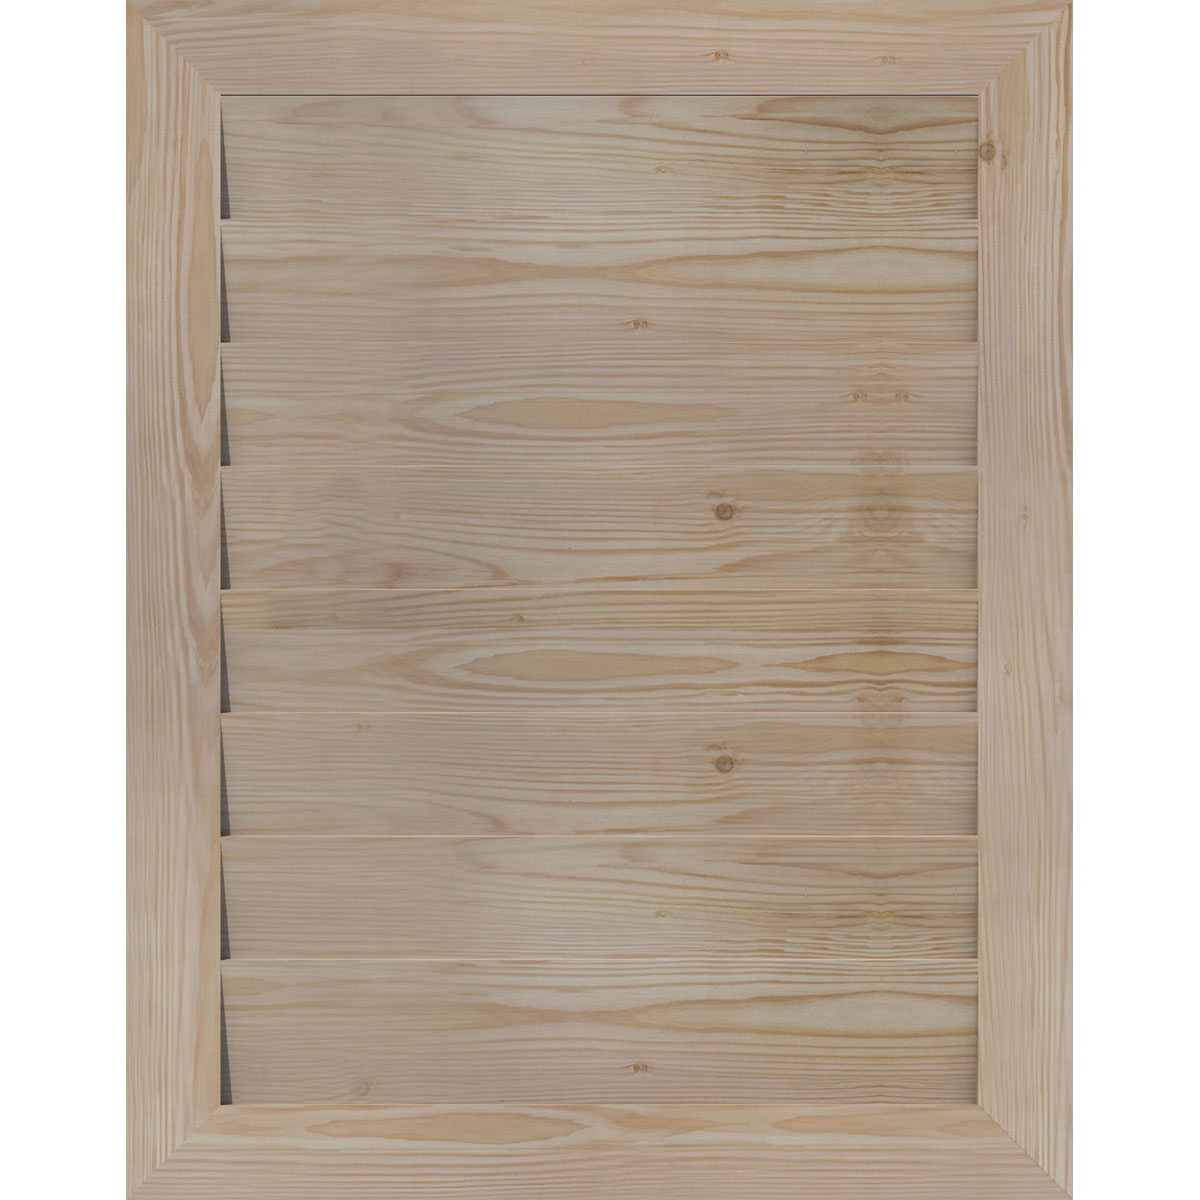 16"W x 30"H Vertical Gable Vent (21"W x 35"H Frame Size): Unfinished, Non-Functional, Smooth Pine Gable Vent w/ Decorative Face Frame - image 3 of 12